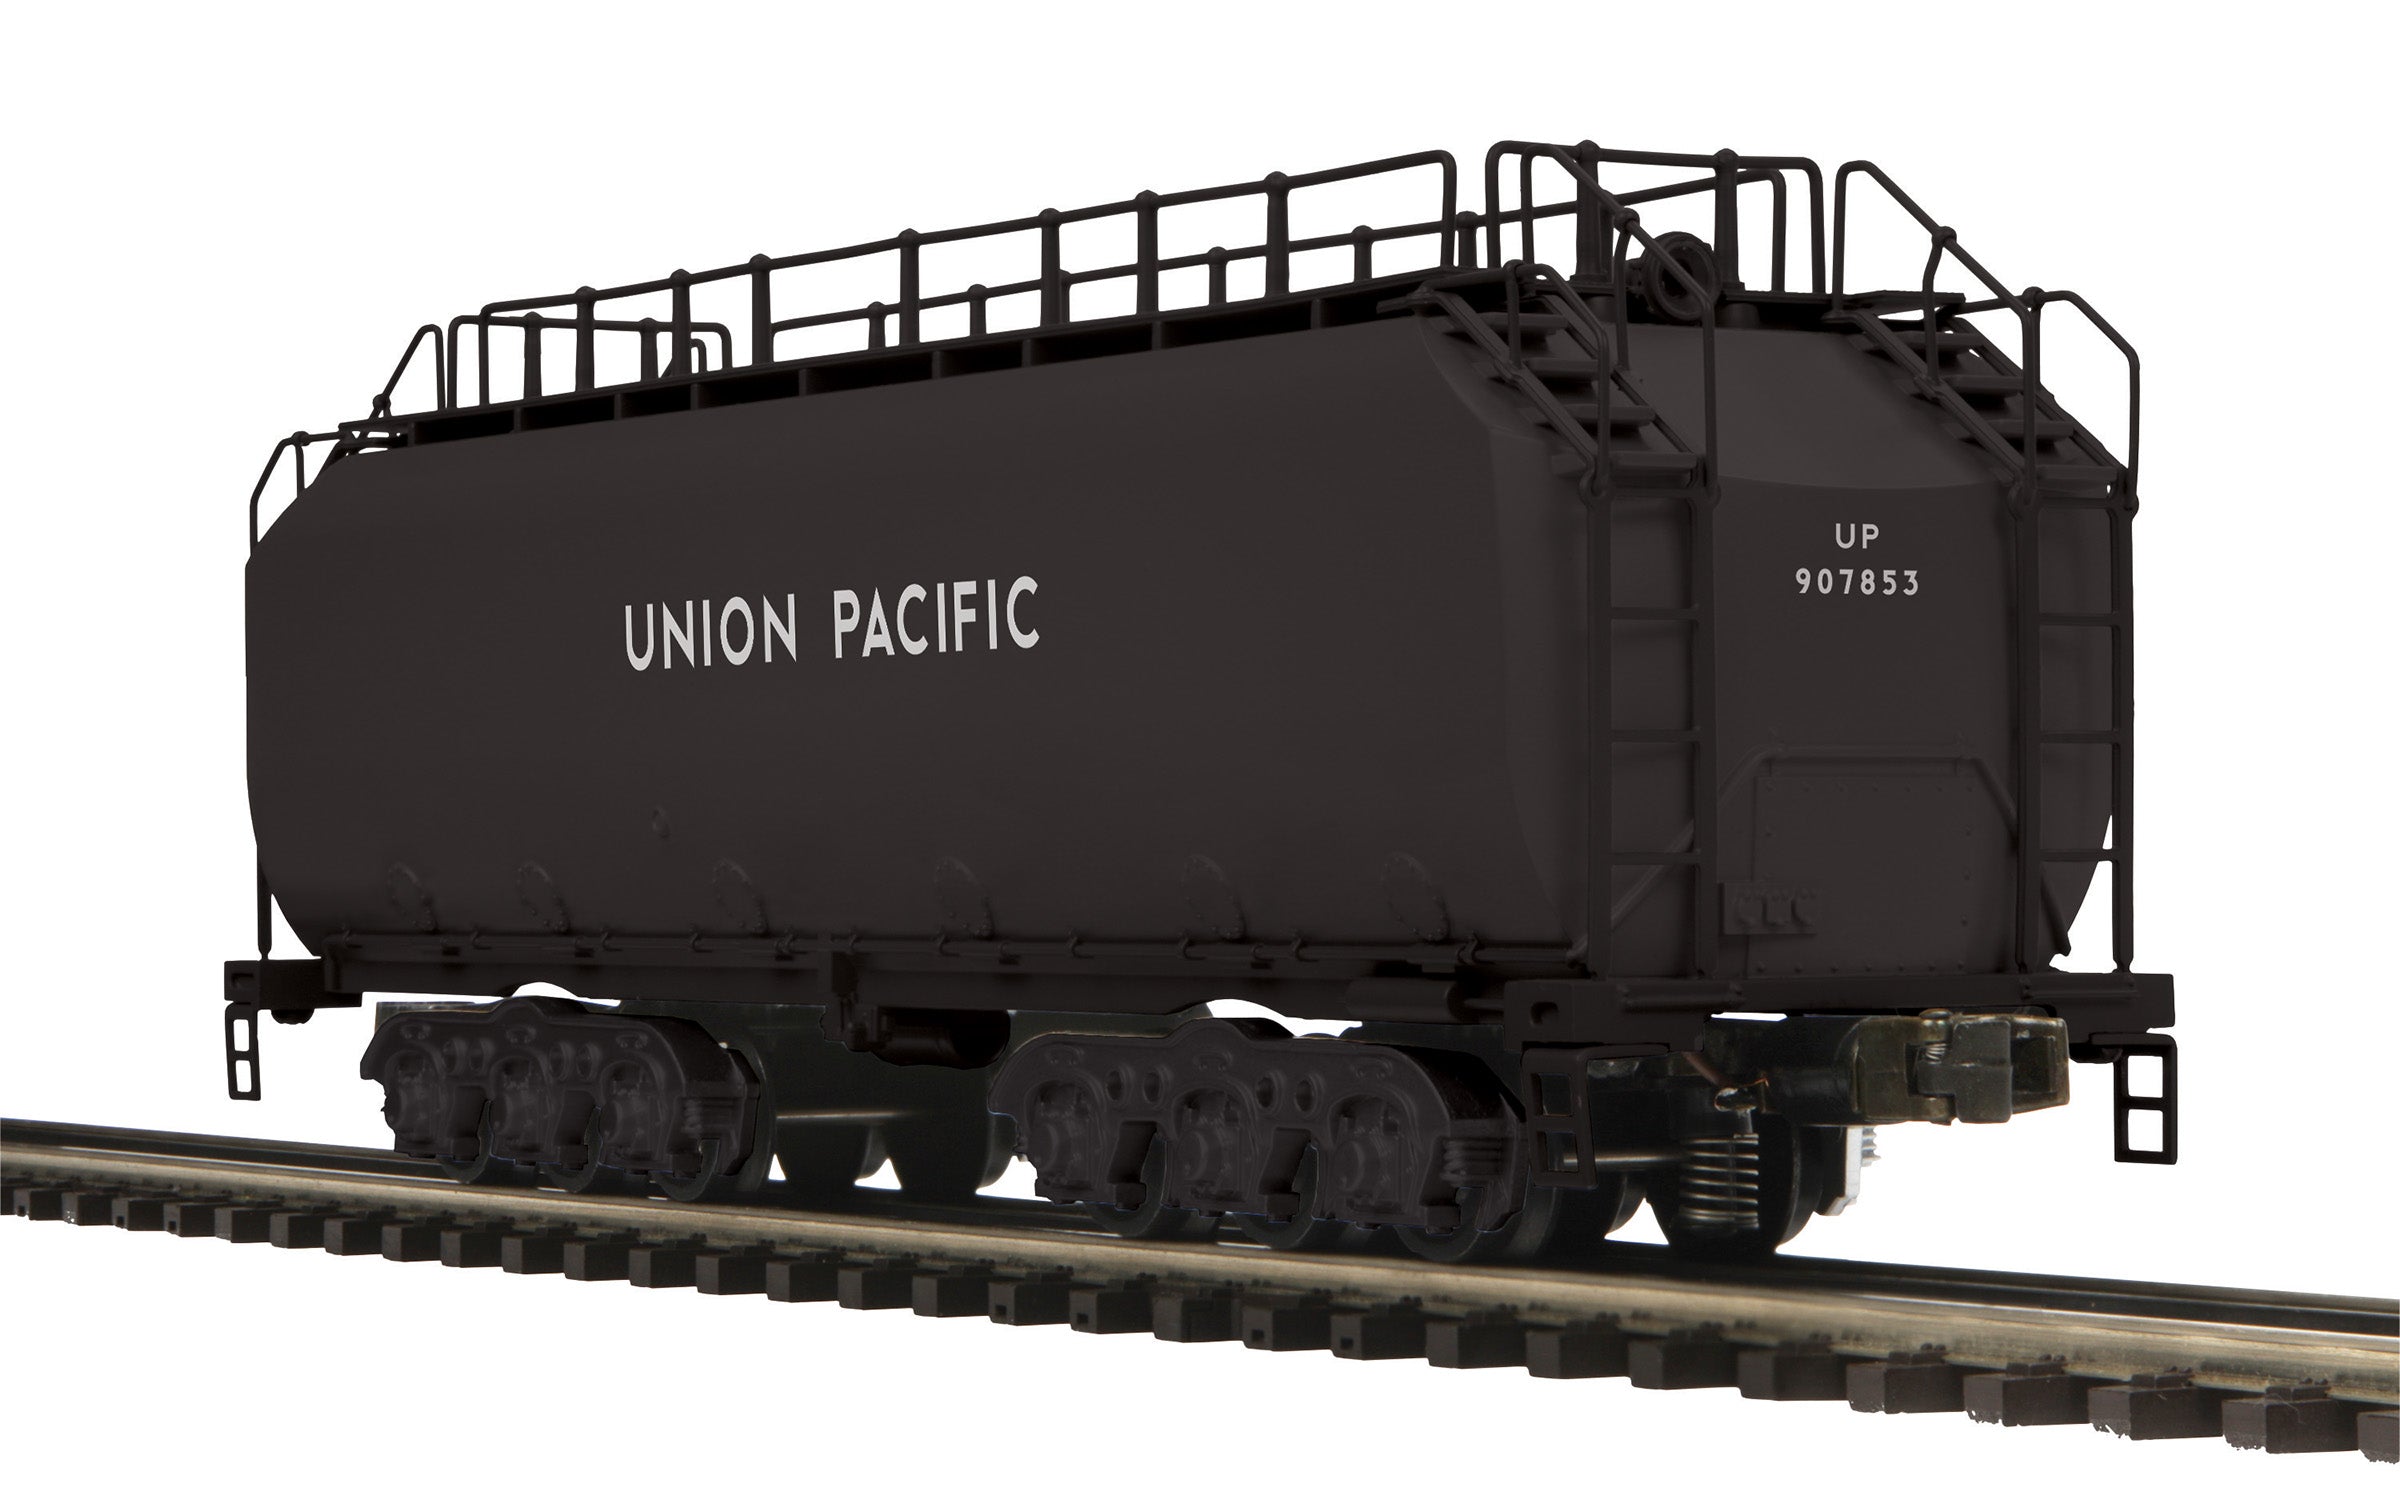 MTH 20-3858 -  Auxiliary Water Tender I "Union Pacific" #907853 (Hi-Rail Wheels)